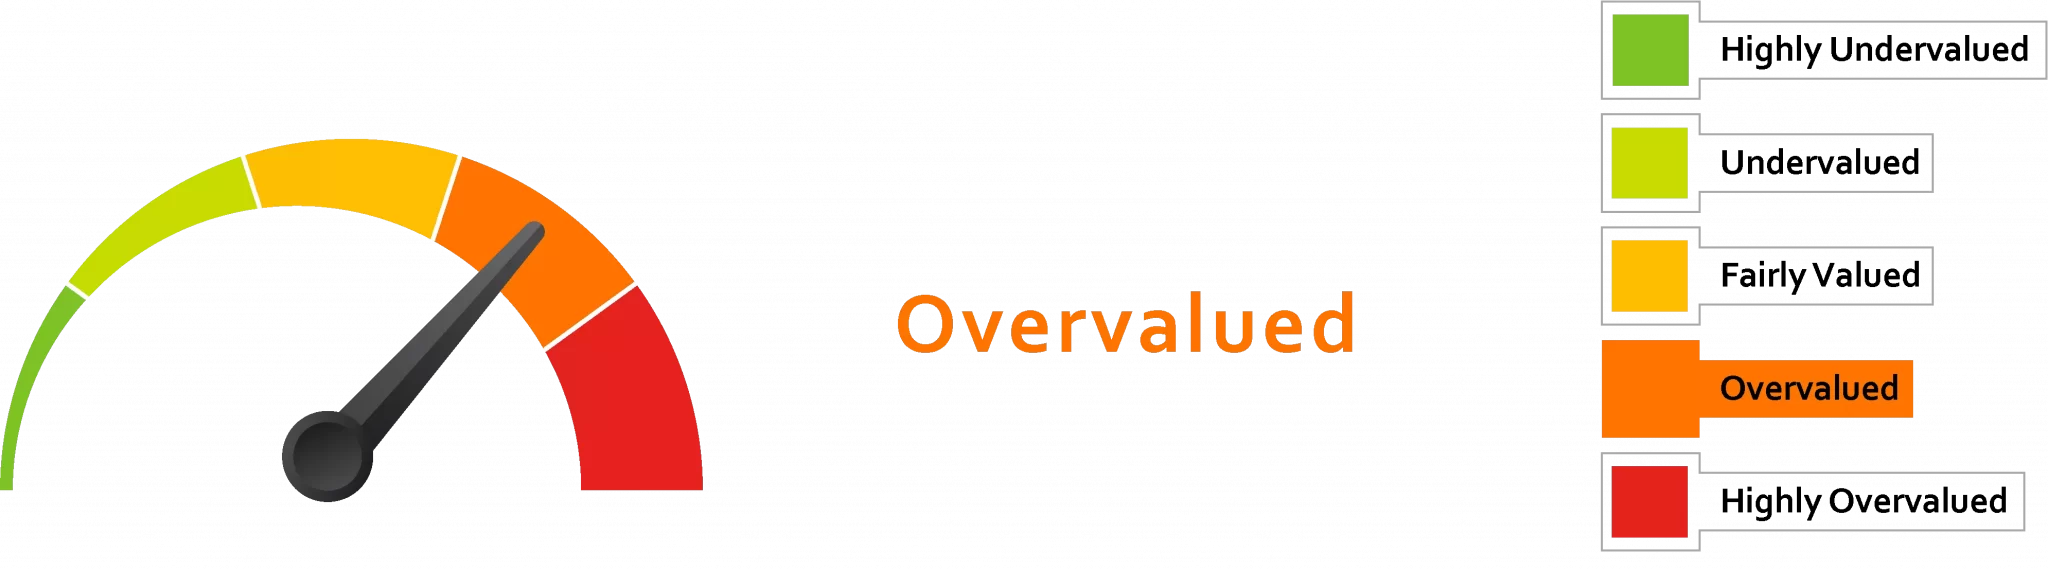 Overvalued